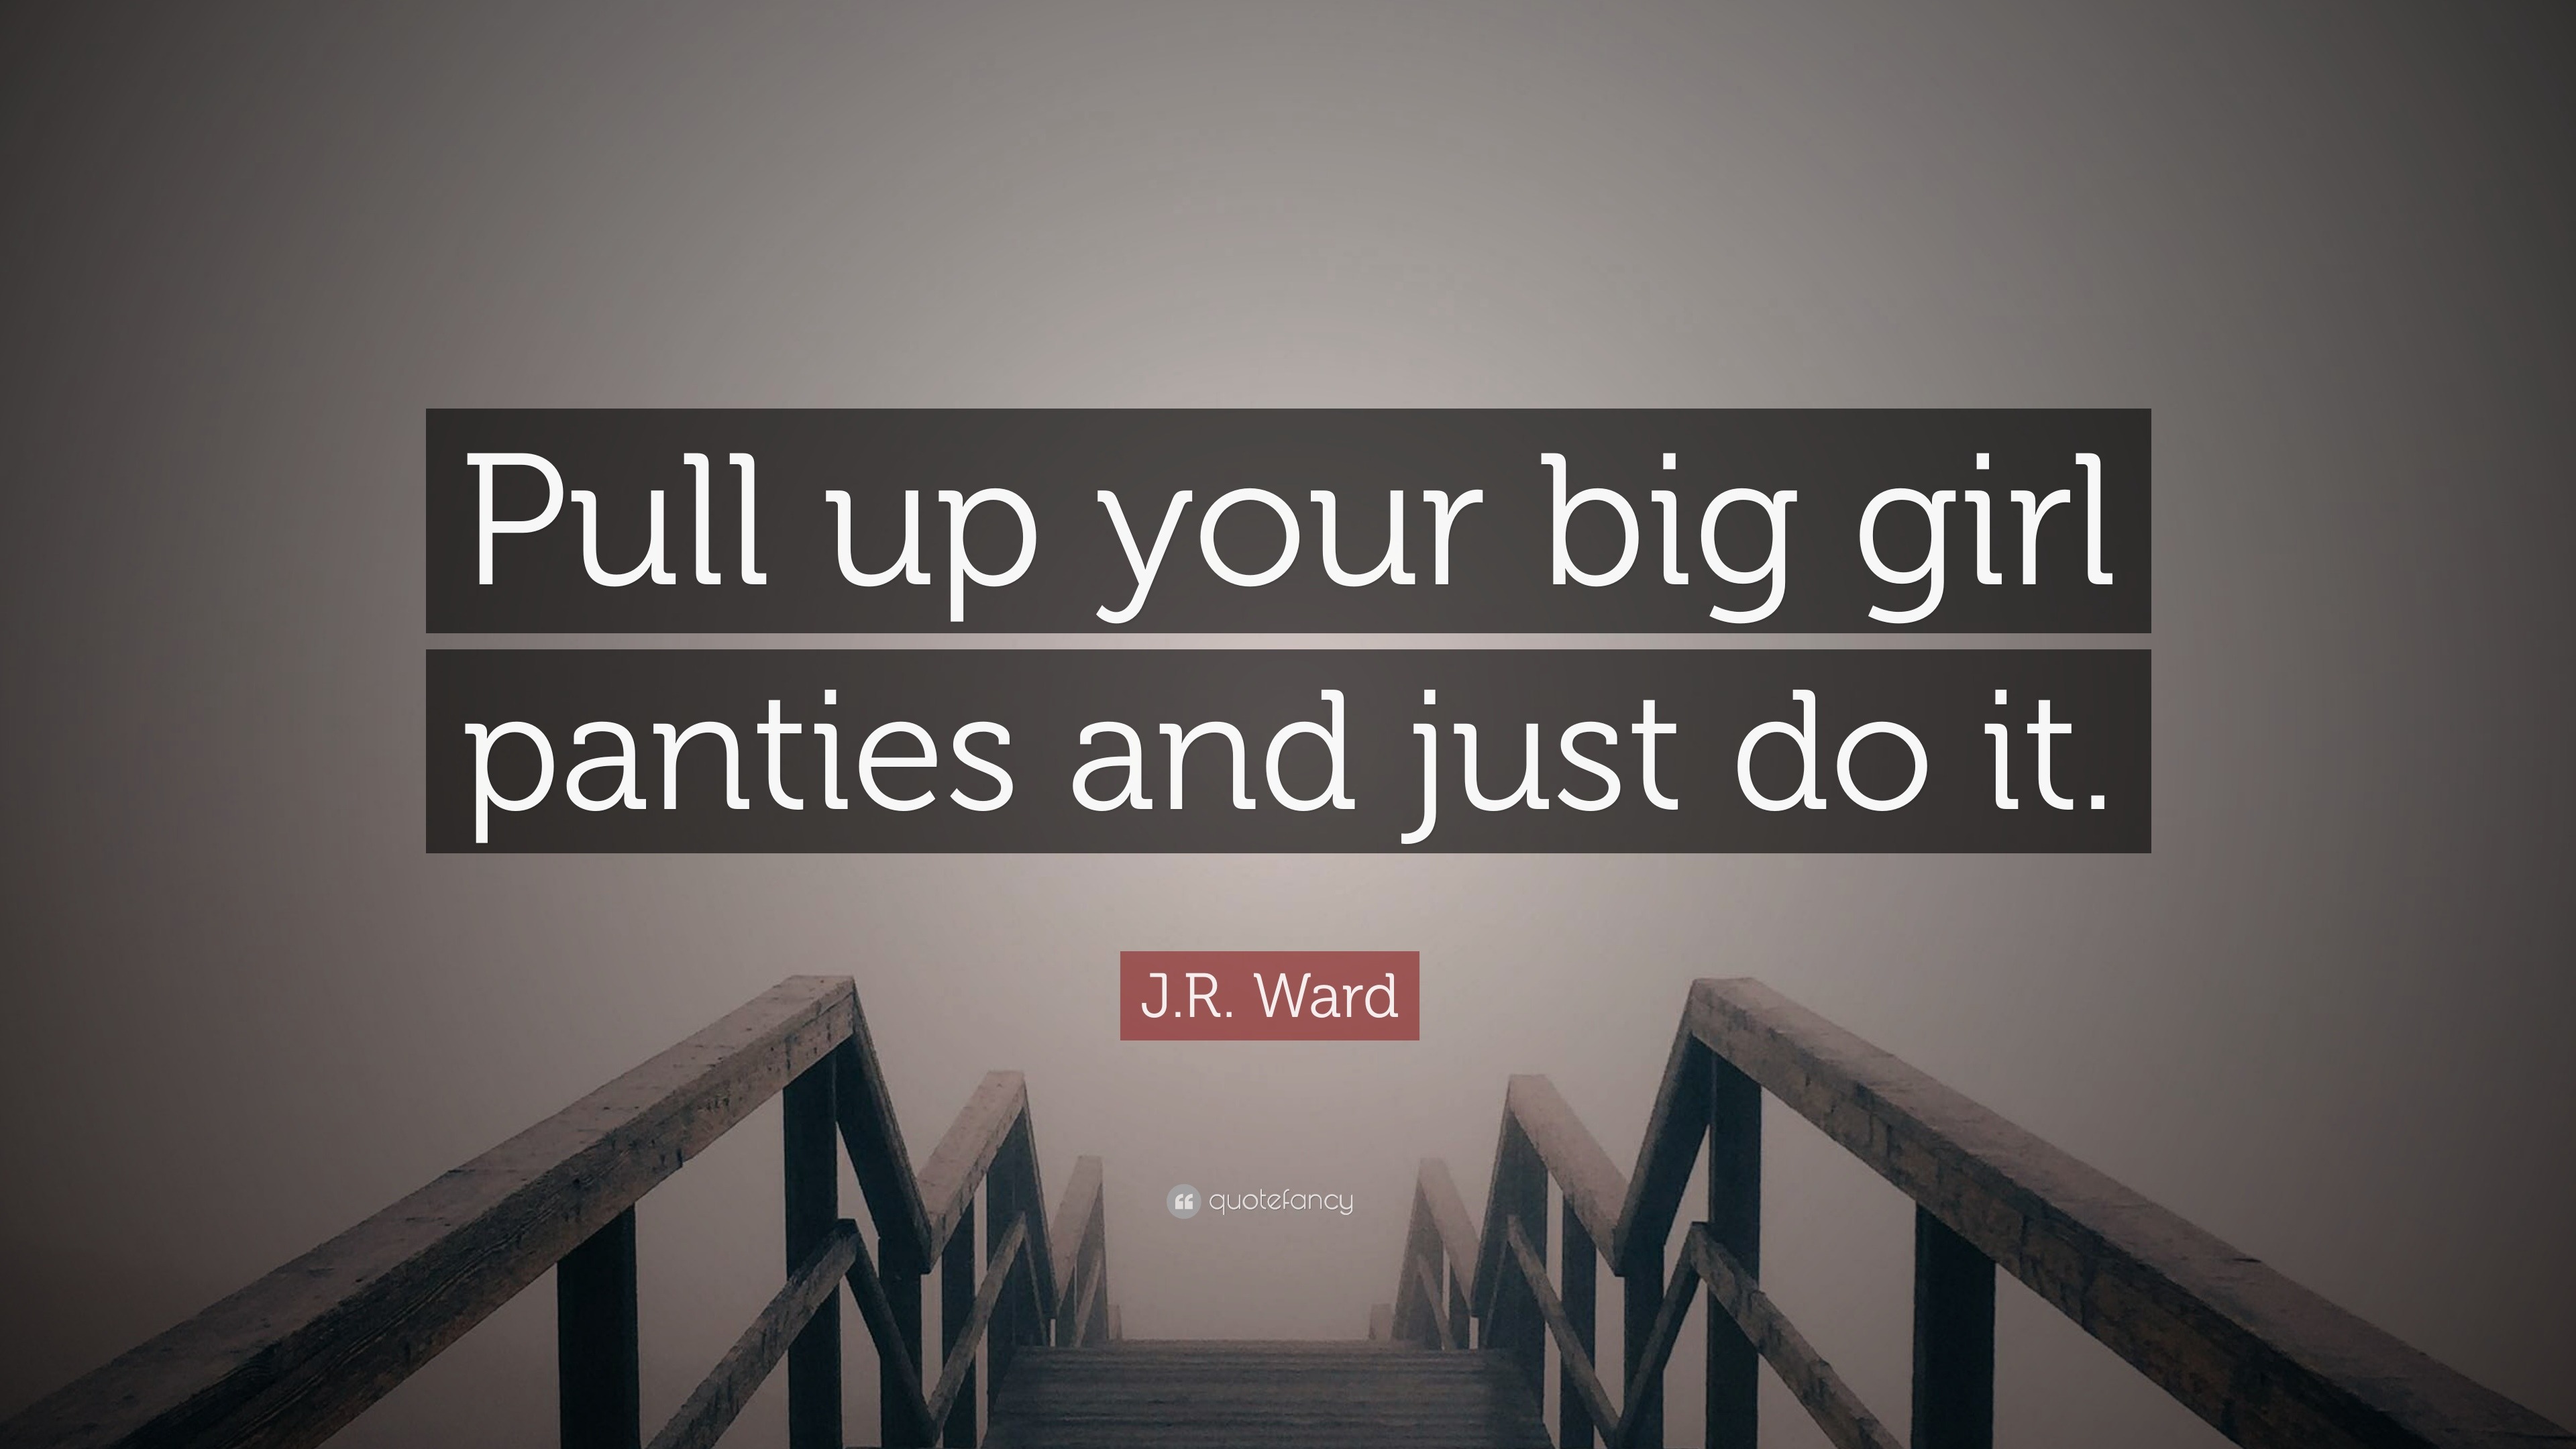 J.R. Ward Quote: “Pull up your big girl panties and just do it.”